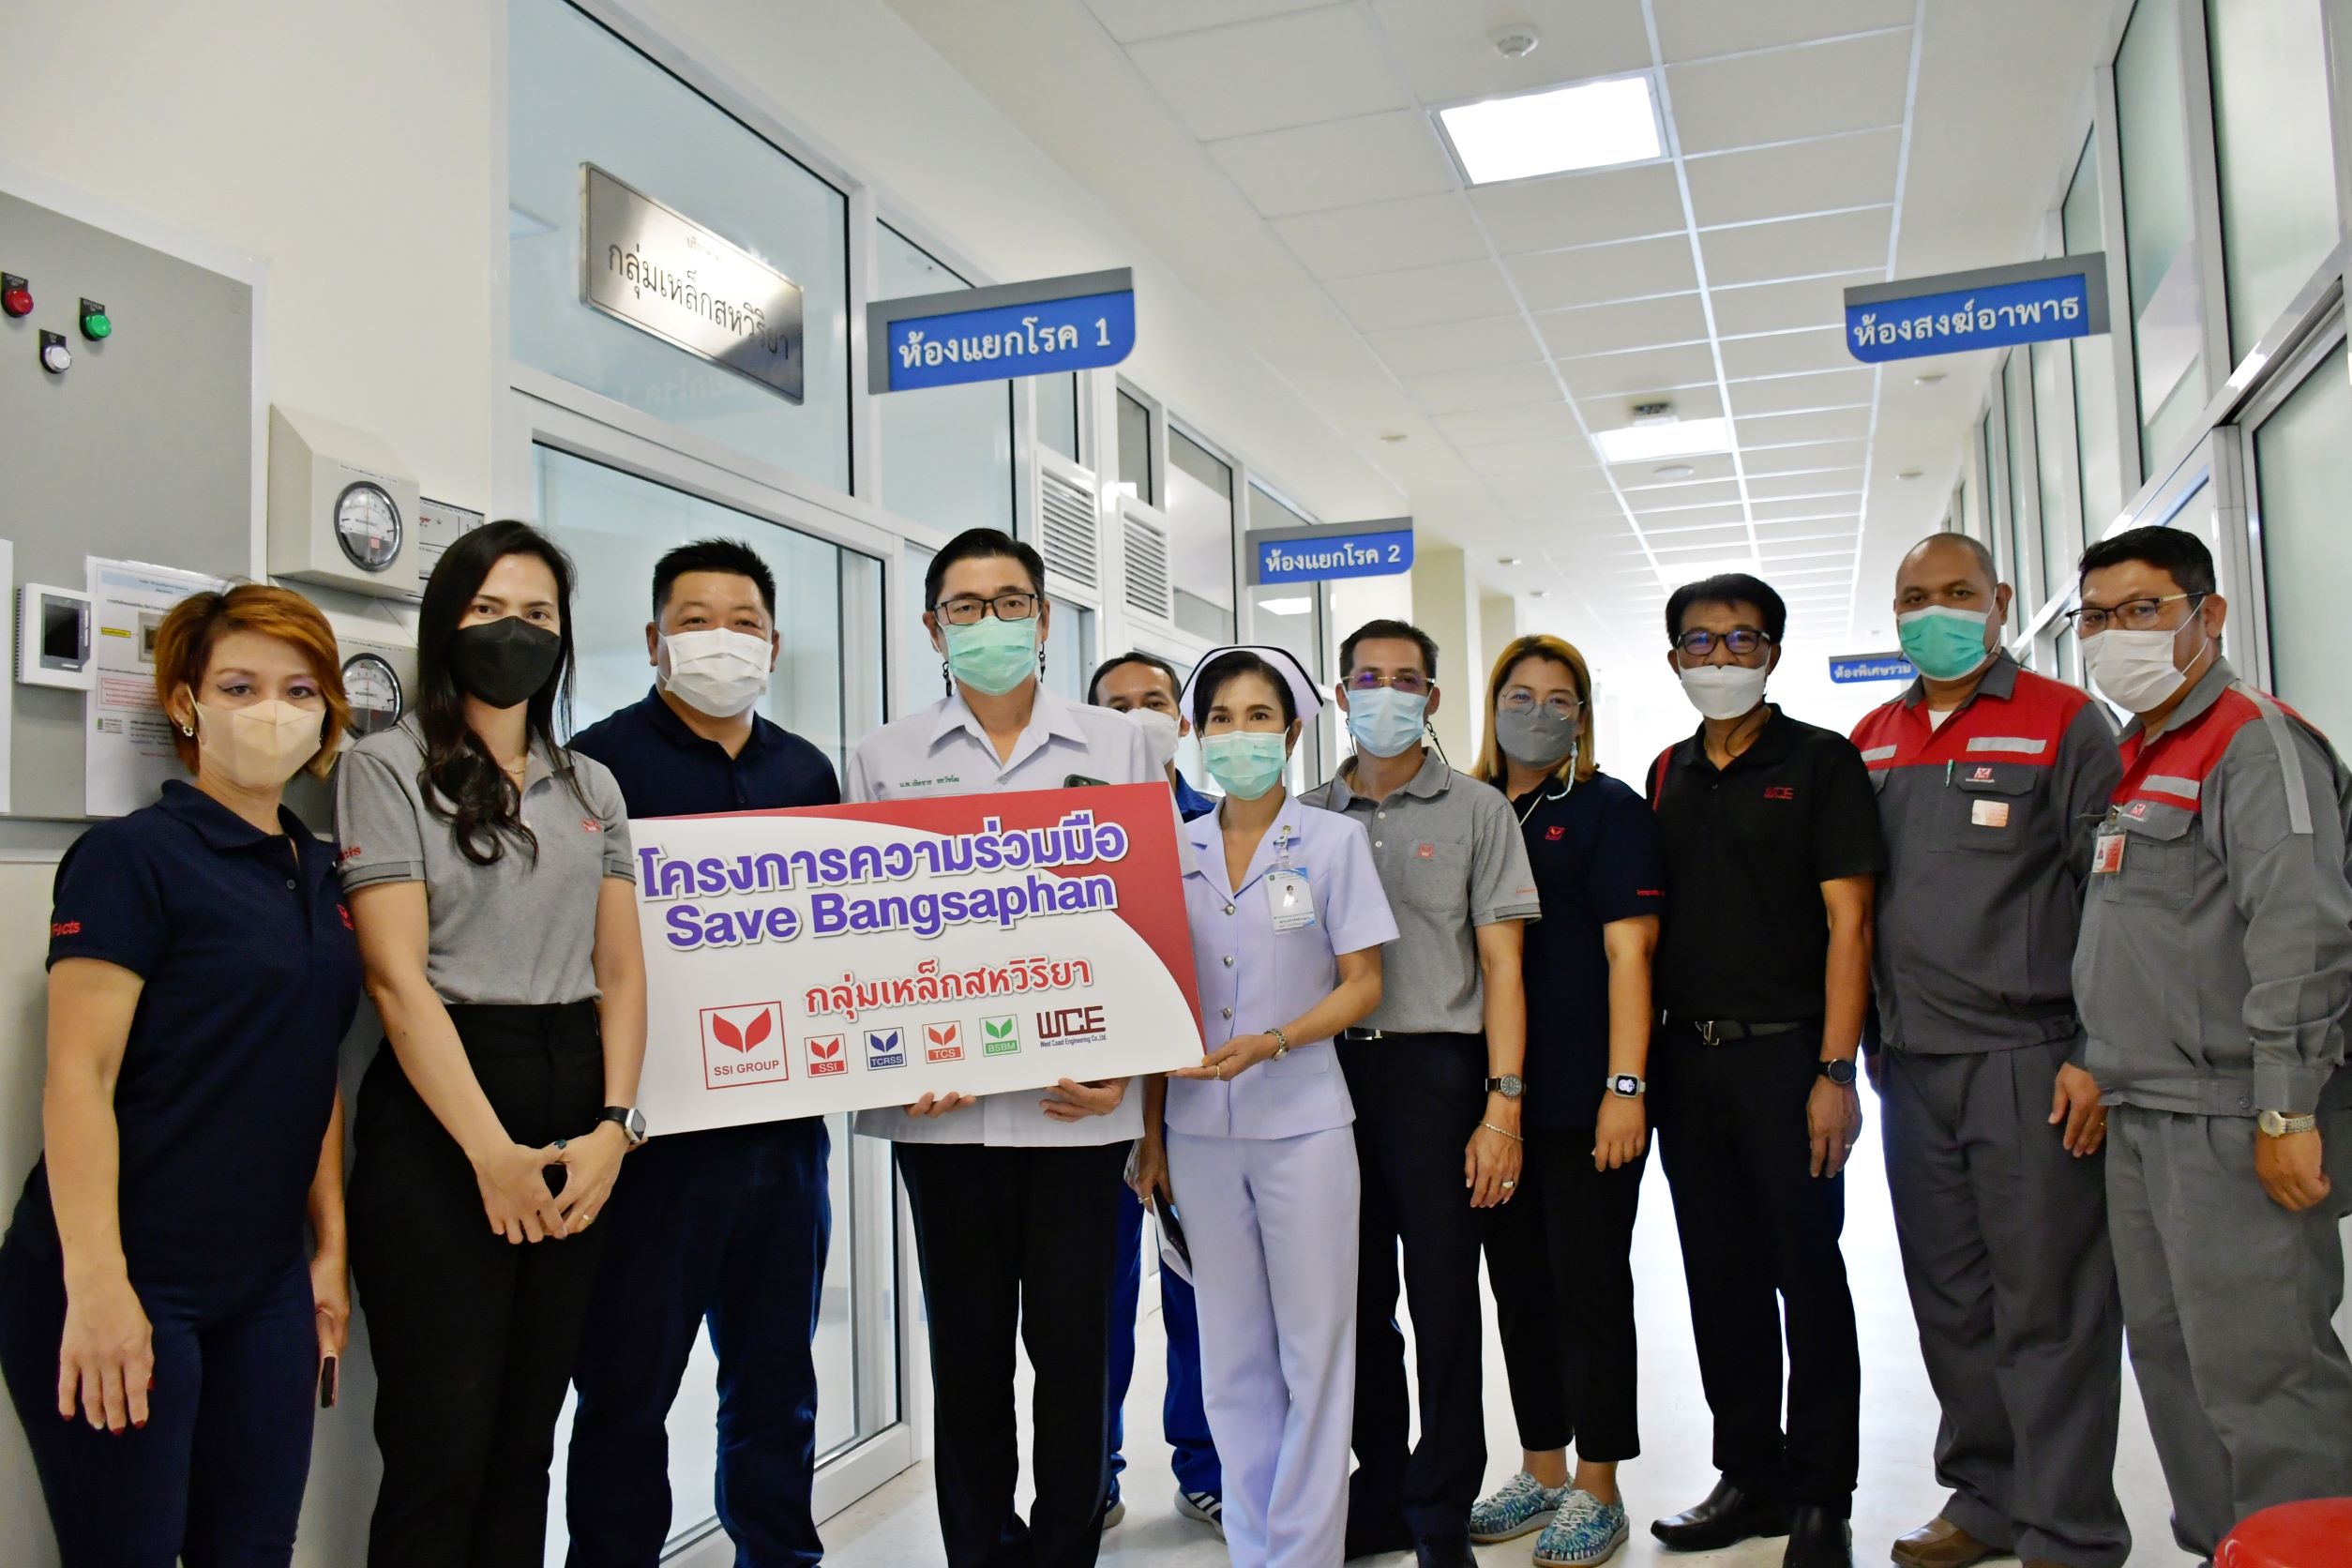 SSI Group strengthened public health of the communities by supplying a negative pressure to Bangsaphan Hospital